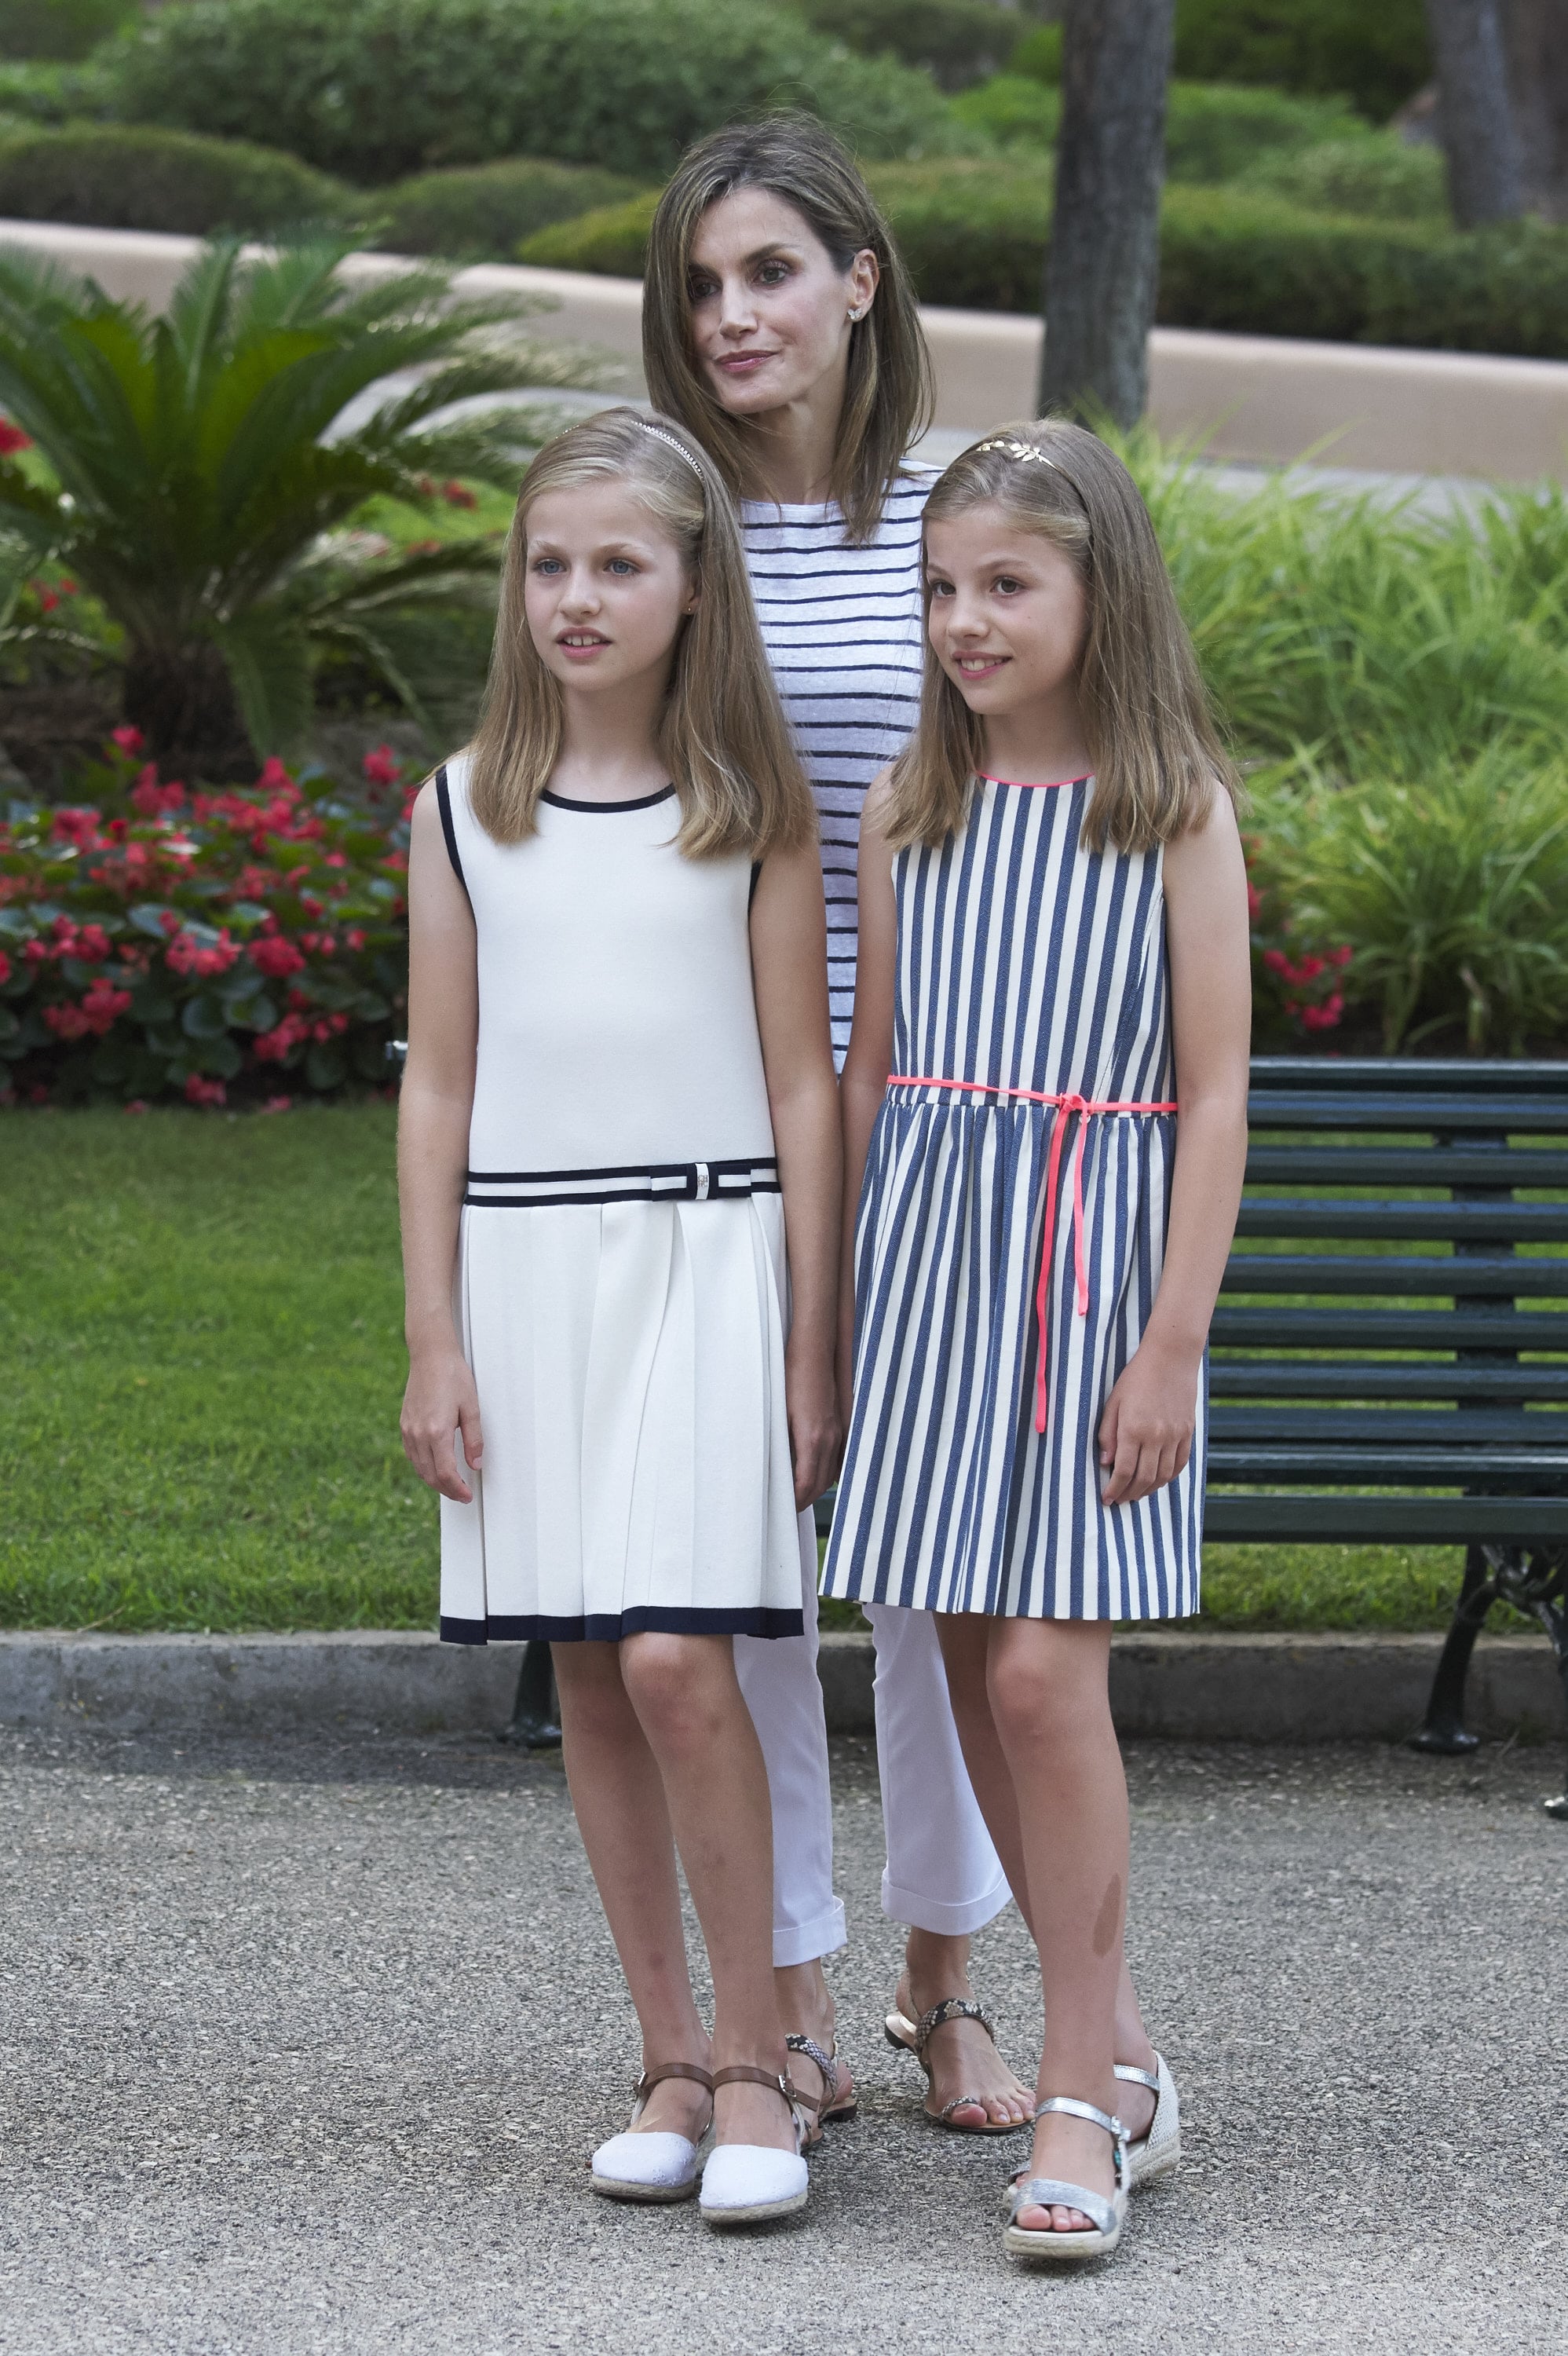 Princess Leonor and Infanta Sofía in 2016 | The Cutest Pictures of ...